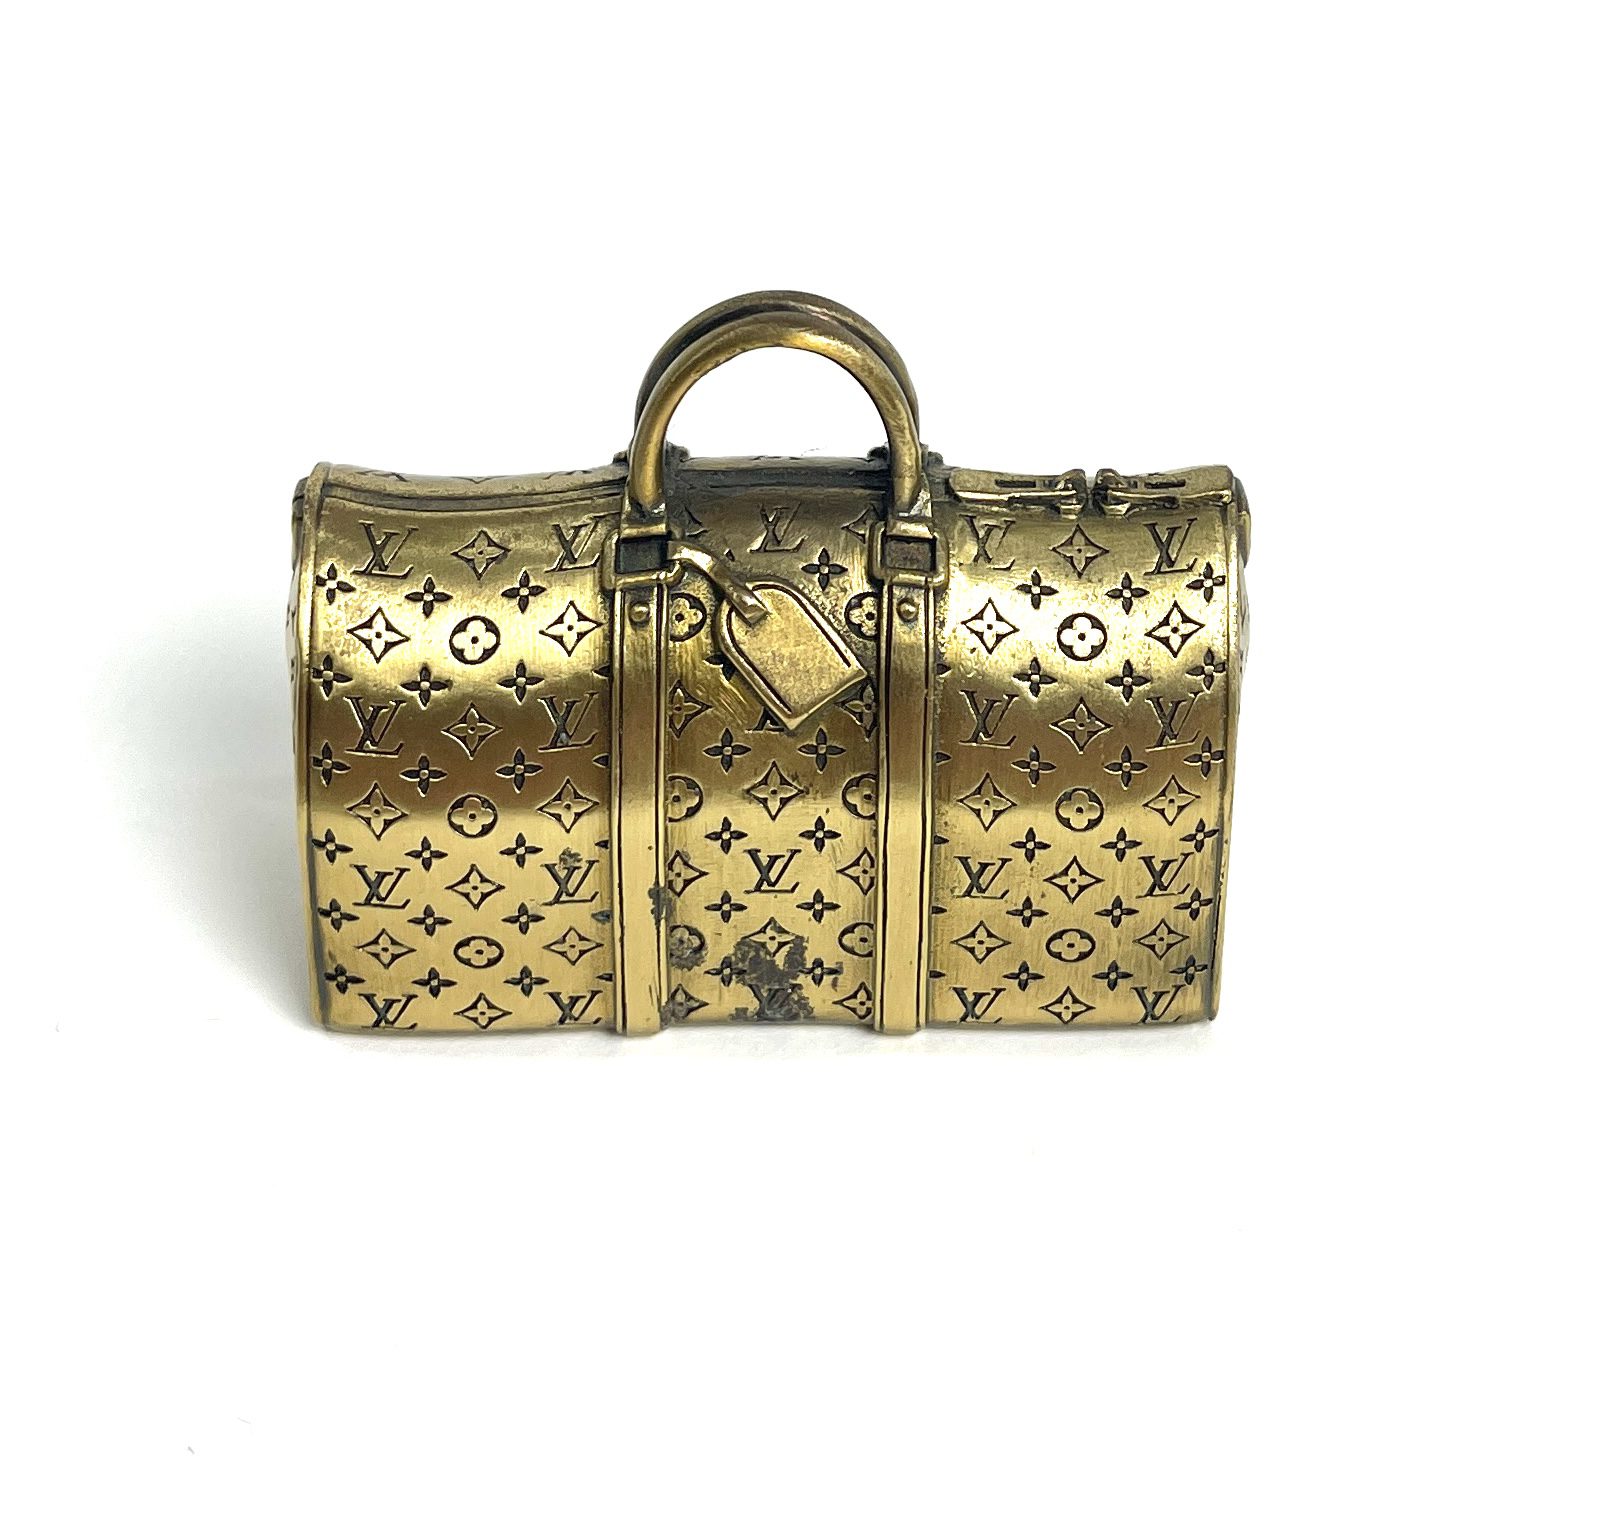 RARE Vintage LOUIS VUITTON Suitcase Brief Case Keepall Carry On Tote  Luggage LV